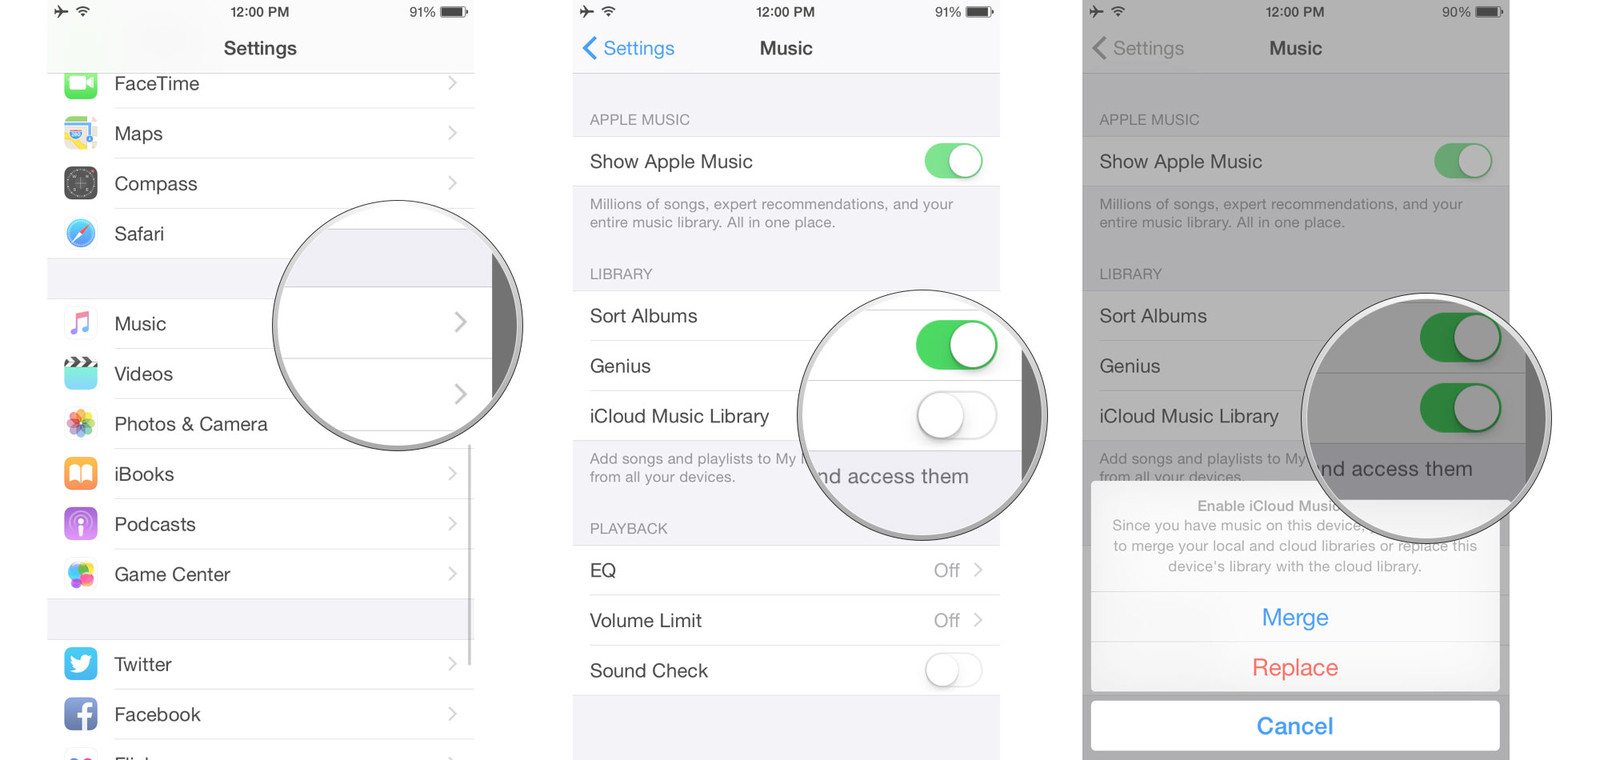 How to turn off icloud music library